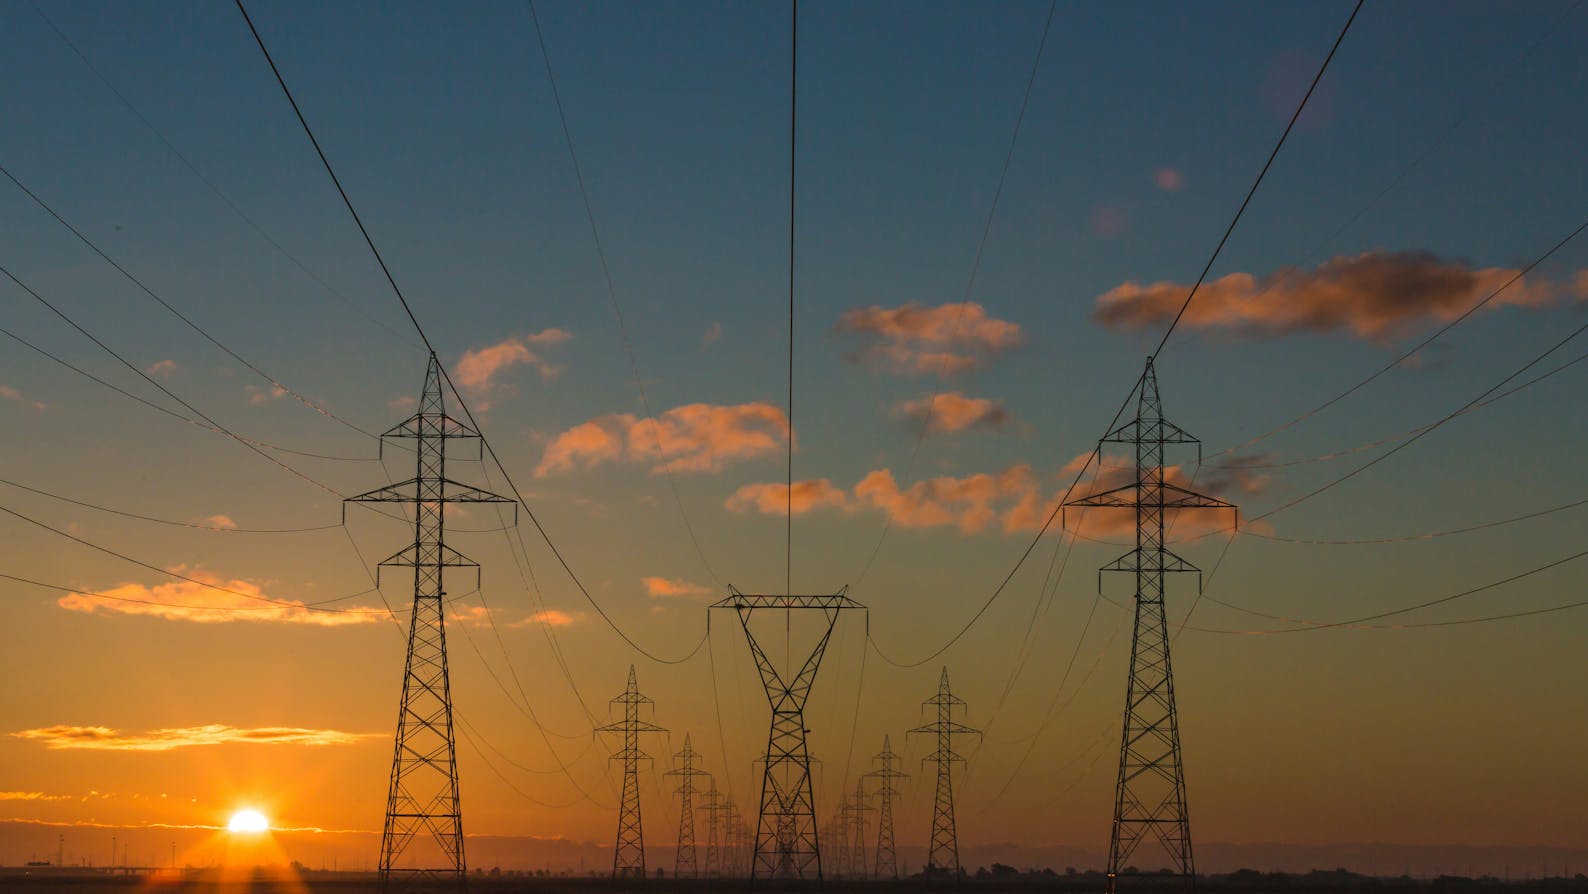 Multiple transmission towers with power lines at sunset.